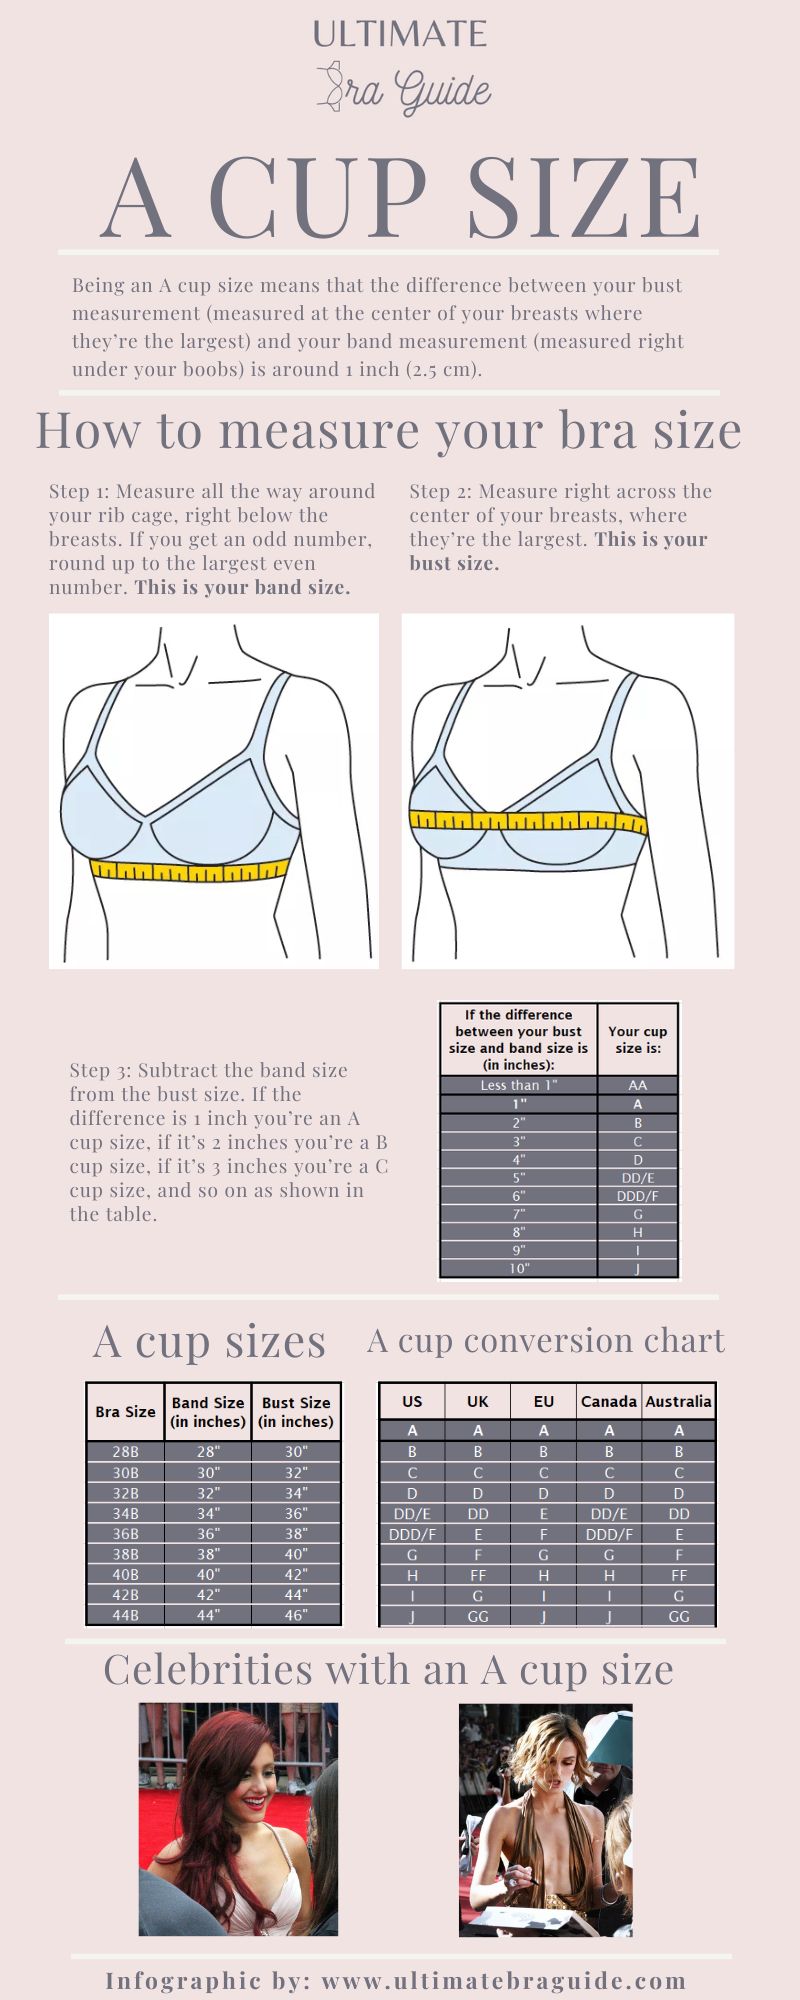 An infographic all about the A cup size - what it is, how to measure if you're A cup, an A cup conversion chart, A cup examples, and so on